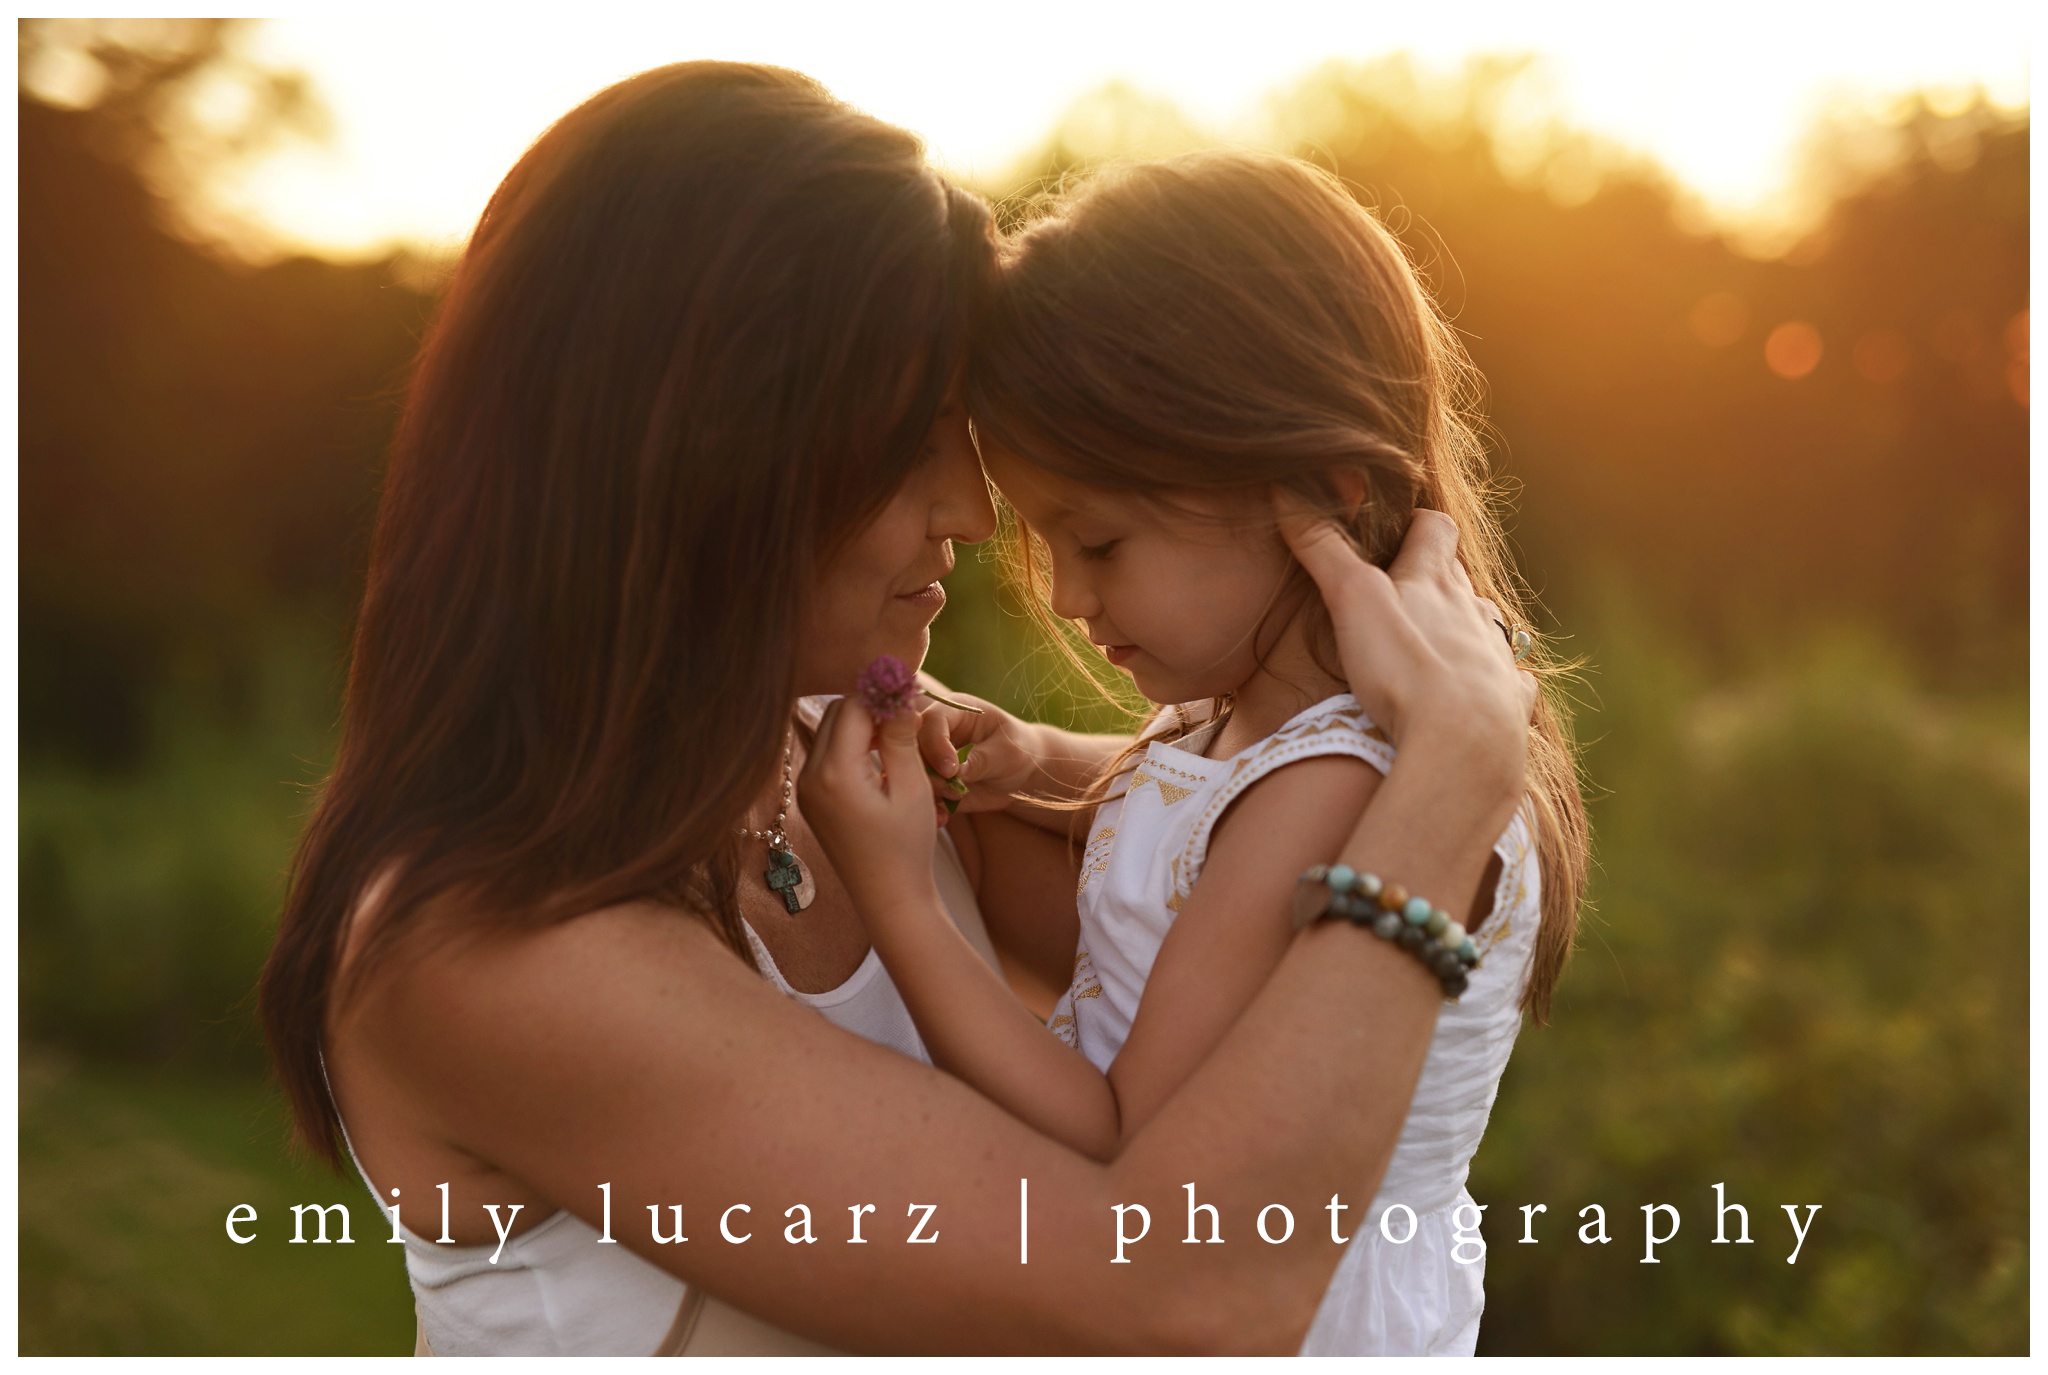 St. Louis family photography ideas